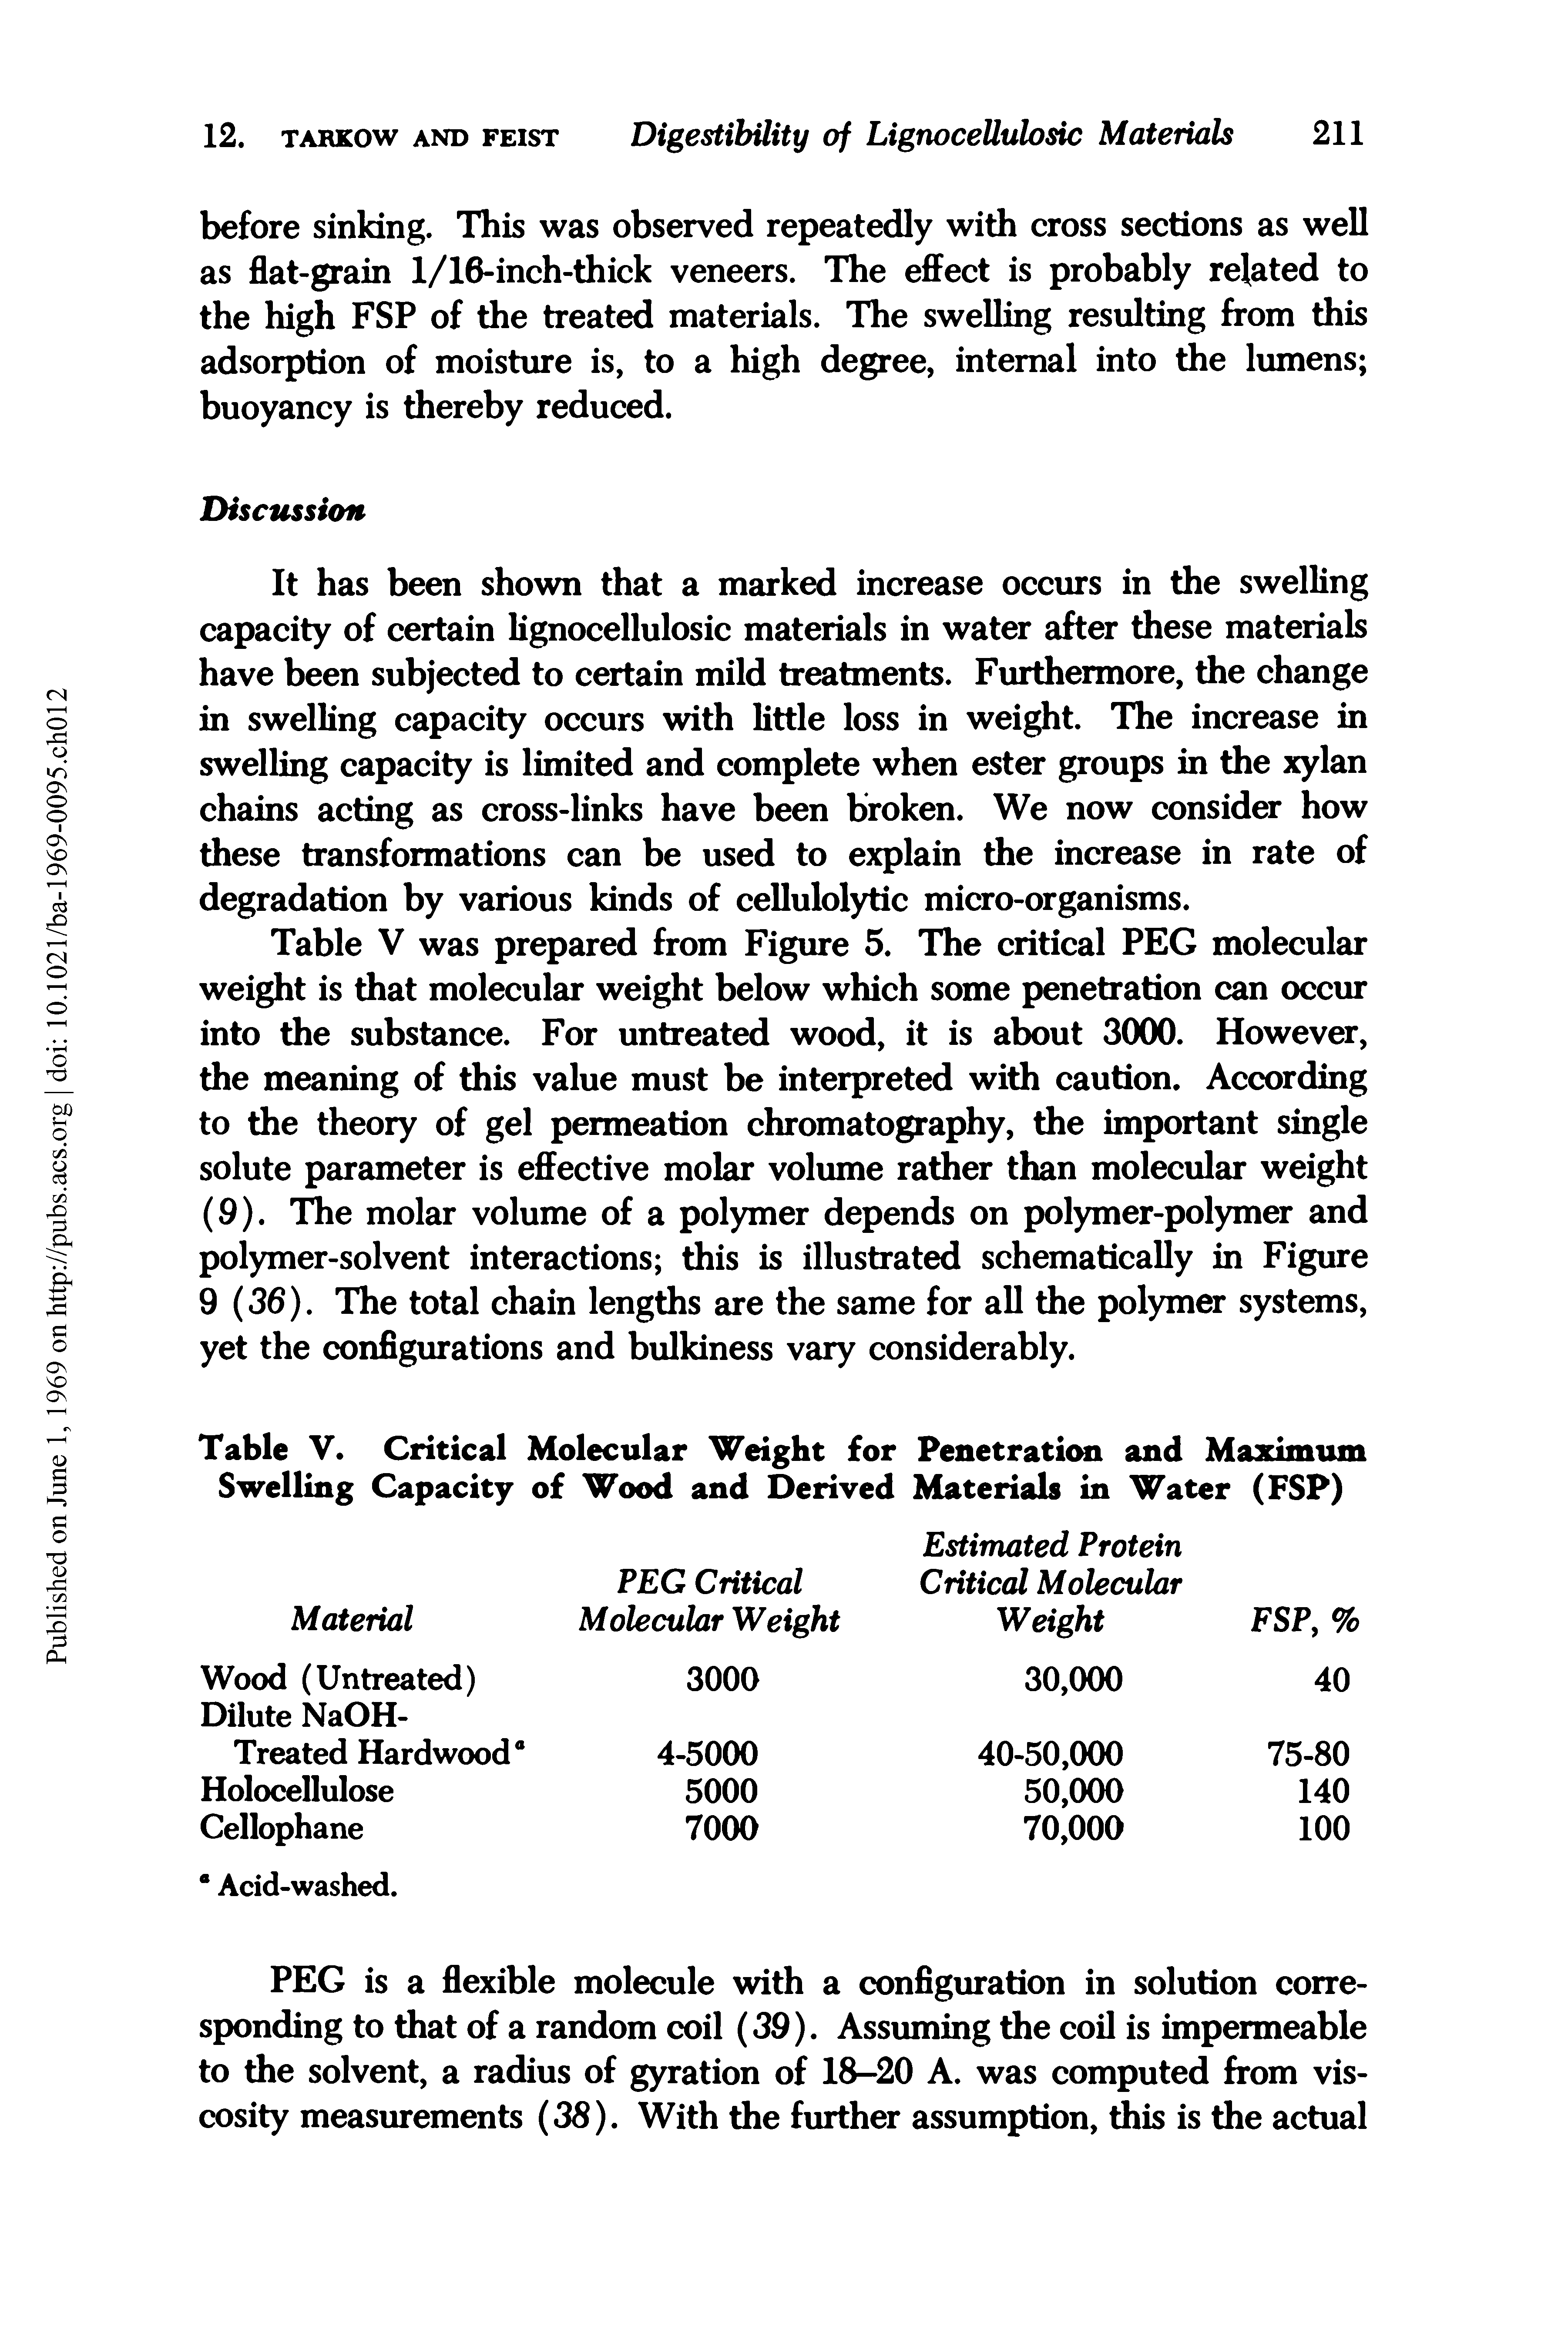 Table V. Critical Molecular Weight for Penetration and Maximum Swelling Capacity of Wood and Derived Materials in Water (FSP)...